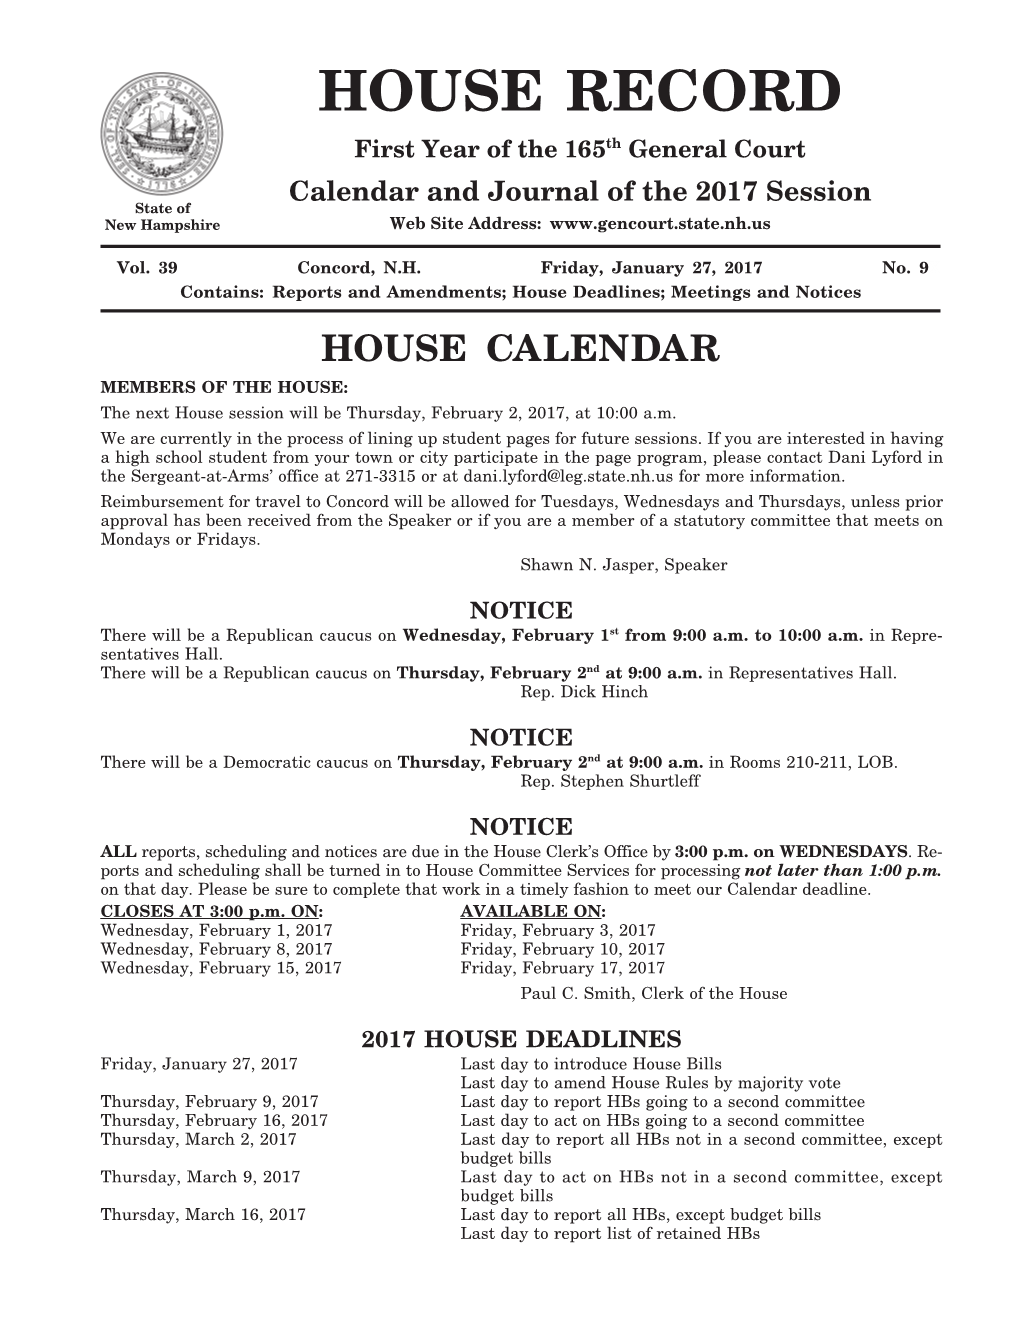 HOUSE CALENDAR MEMBERS of the HOUSE: the Next House Session Will Be Thursday, February 2, 2017, at 10:00 A.M